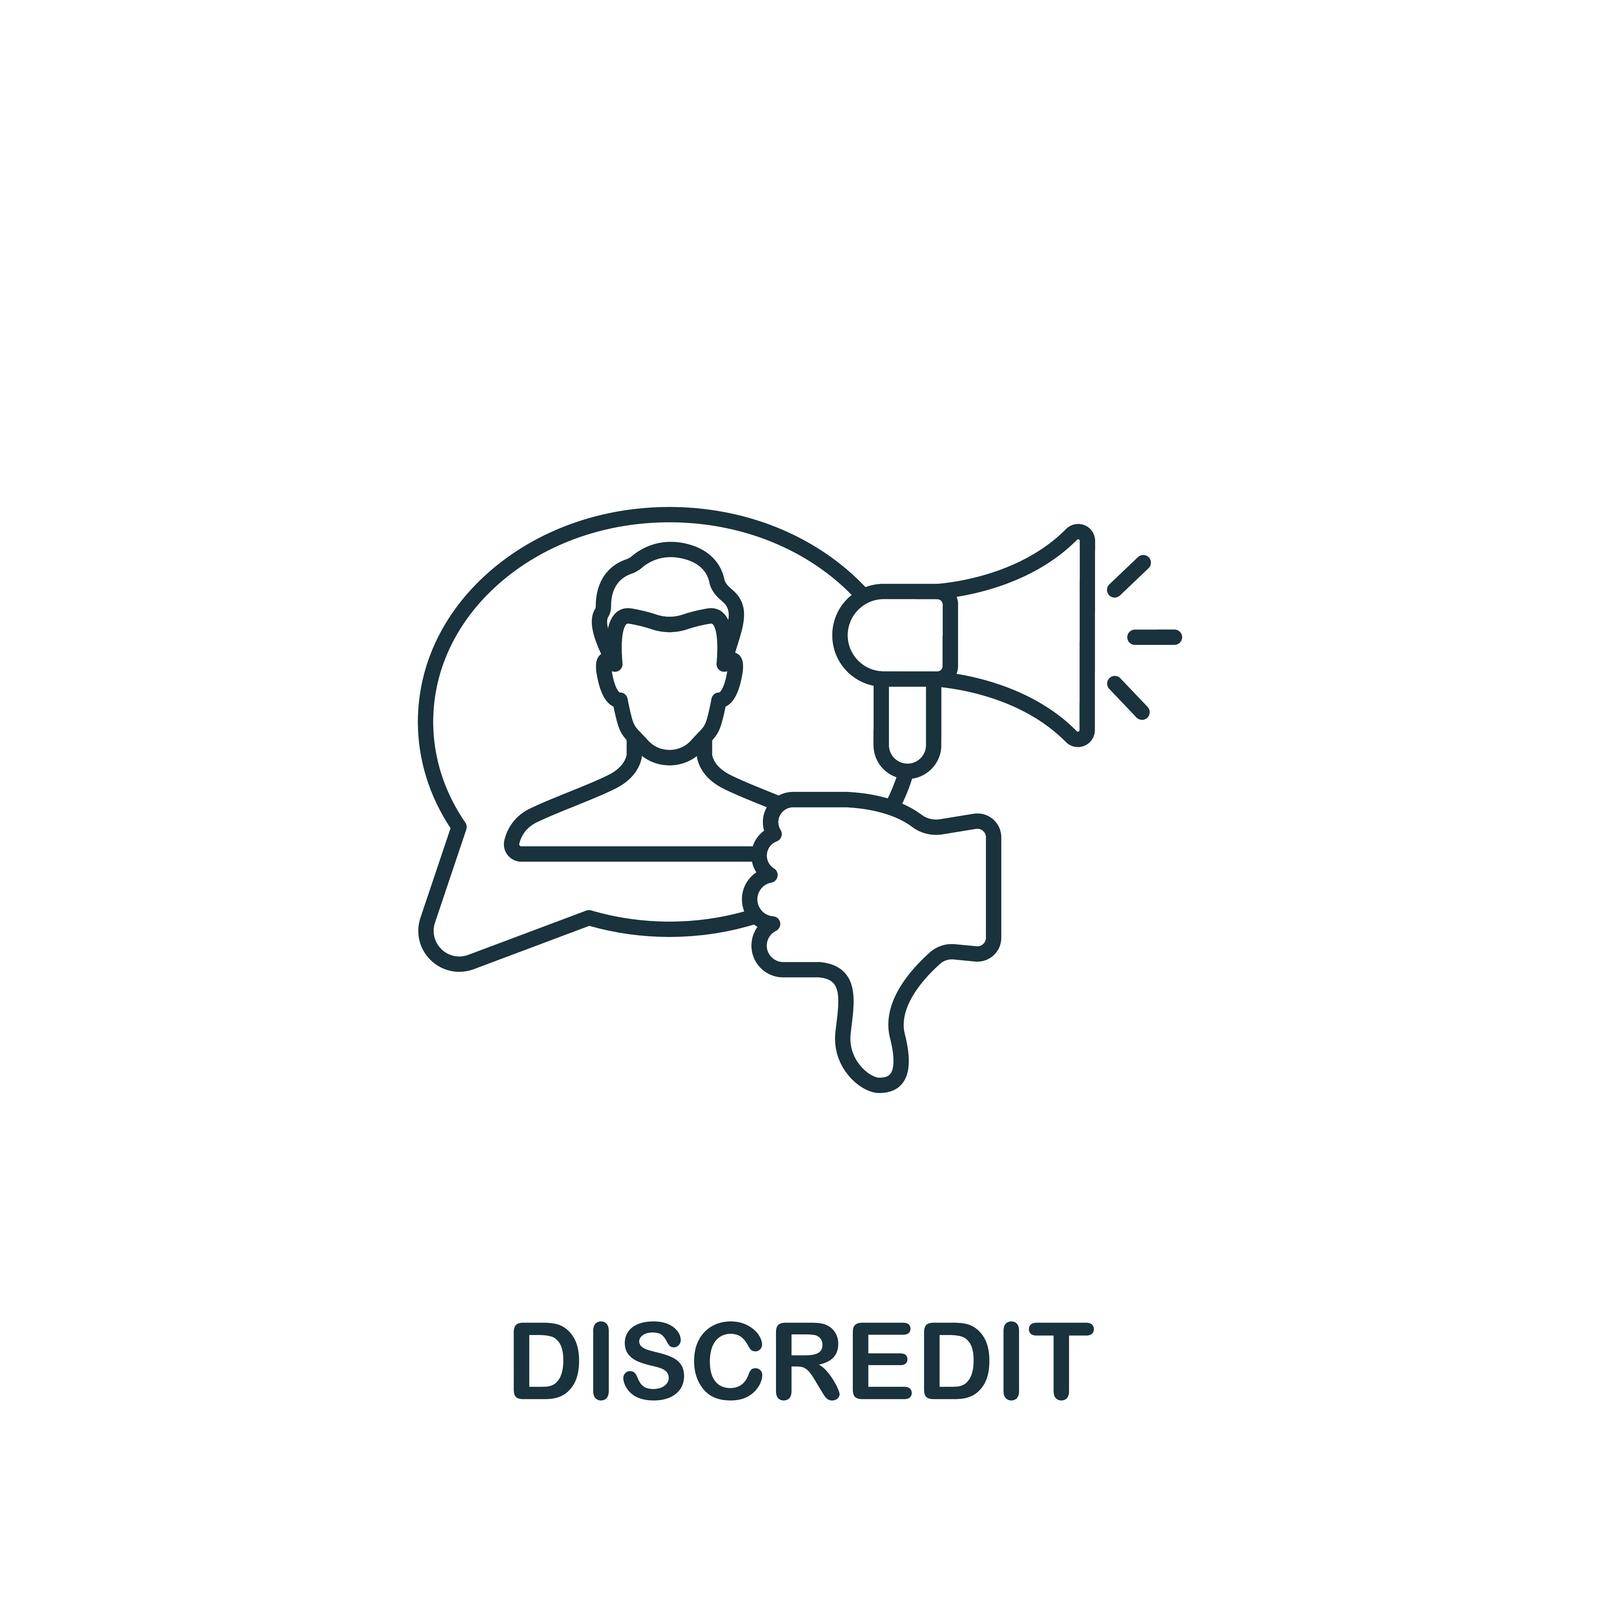 Discredit icon. Monochrome simple line Harassment icon for templates, web design and infographics by simakovavector